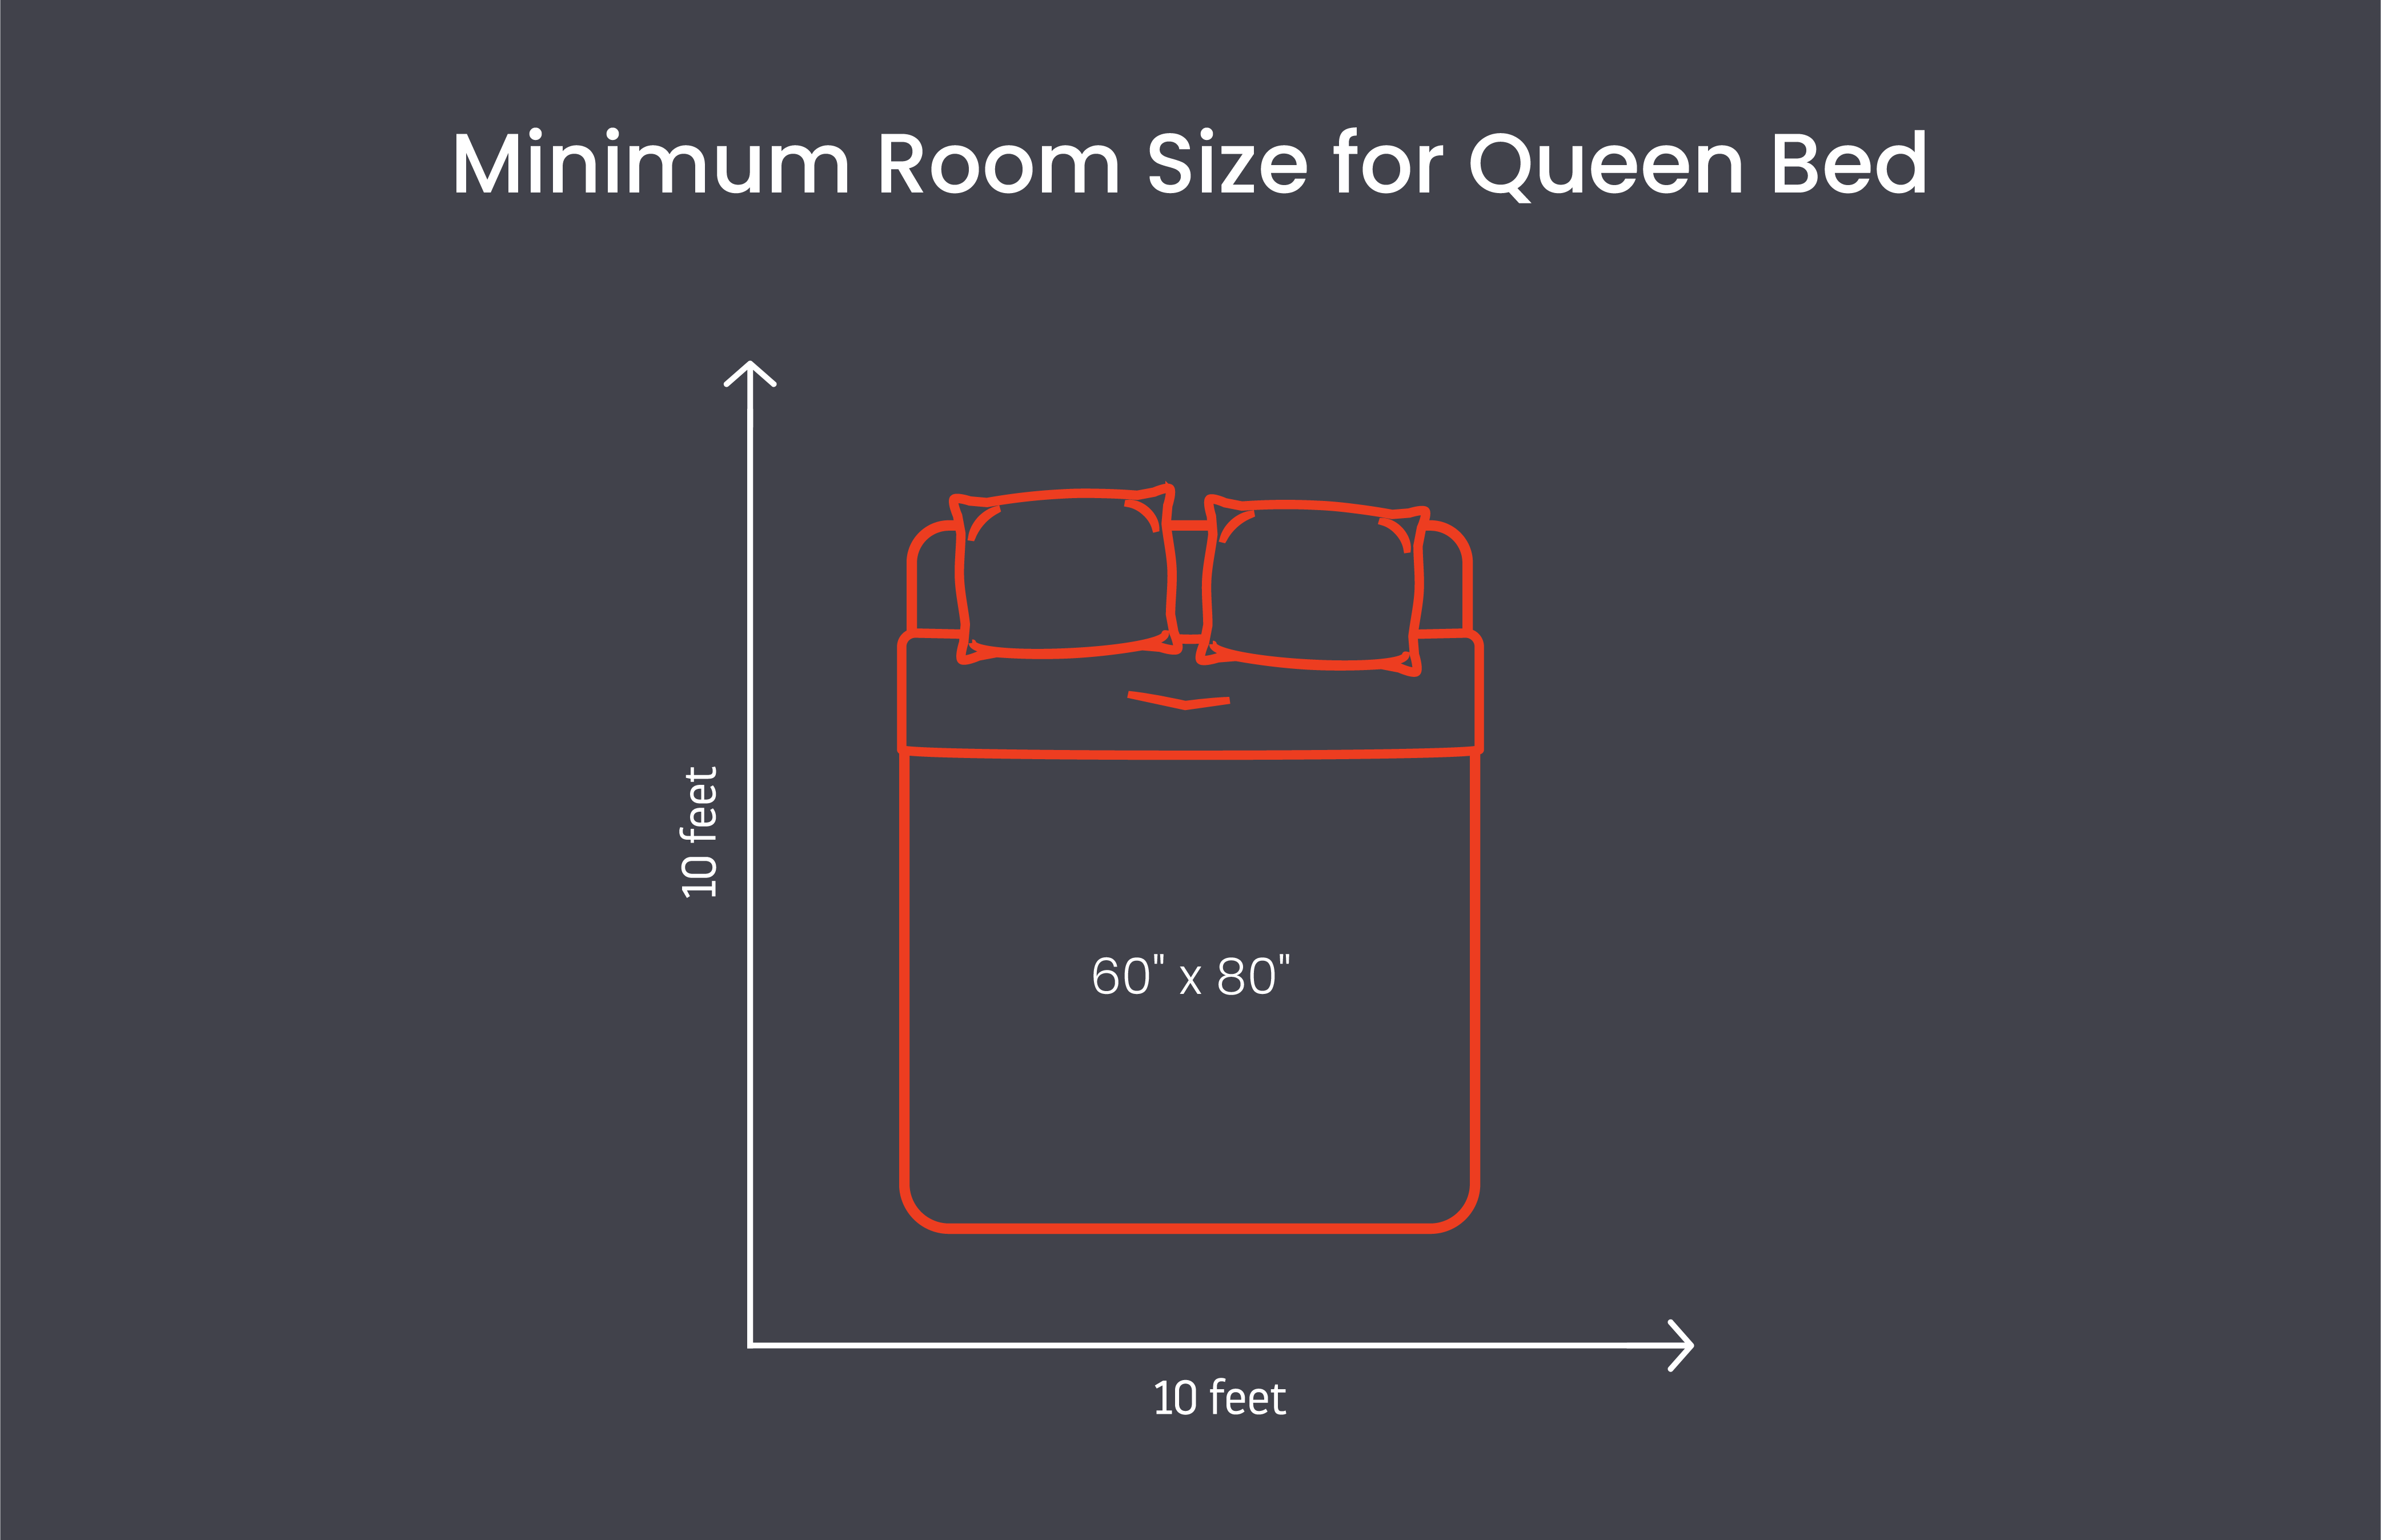 Minimum room size for a queen bed is 10 feet by 10 feet